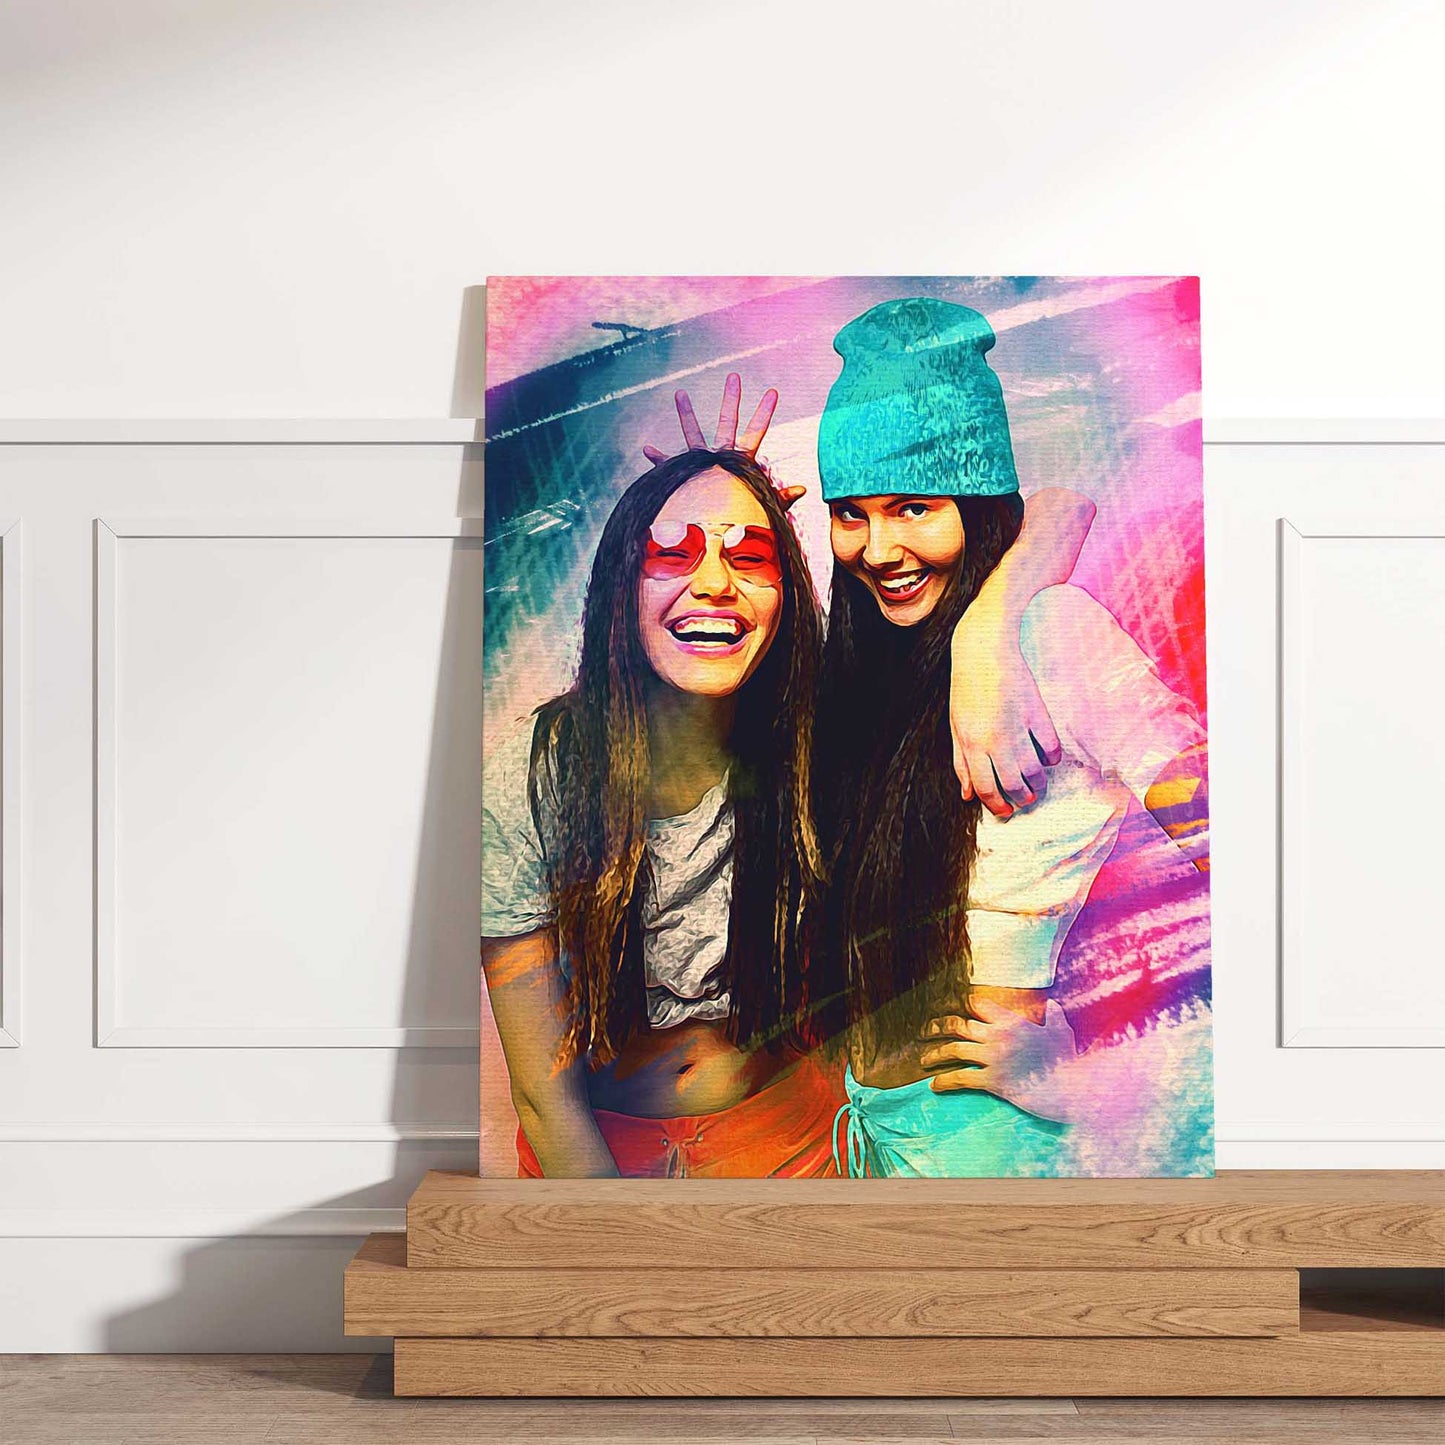 Add a touch of elegance to your space with our Personalised Artistic Painting Canvas